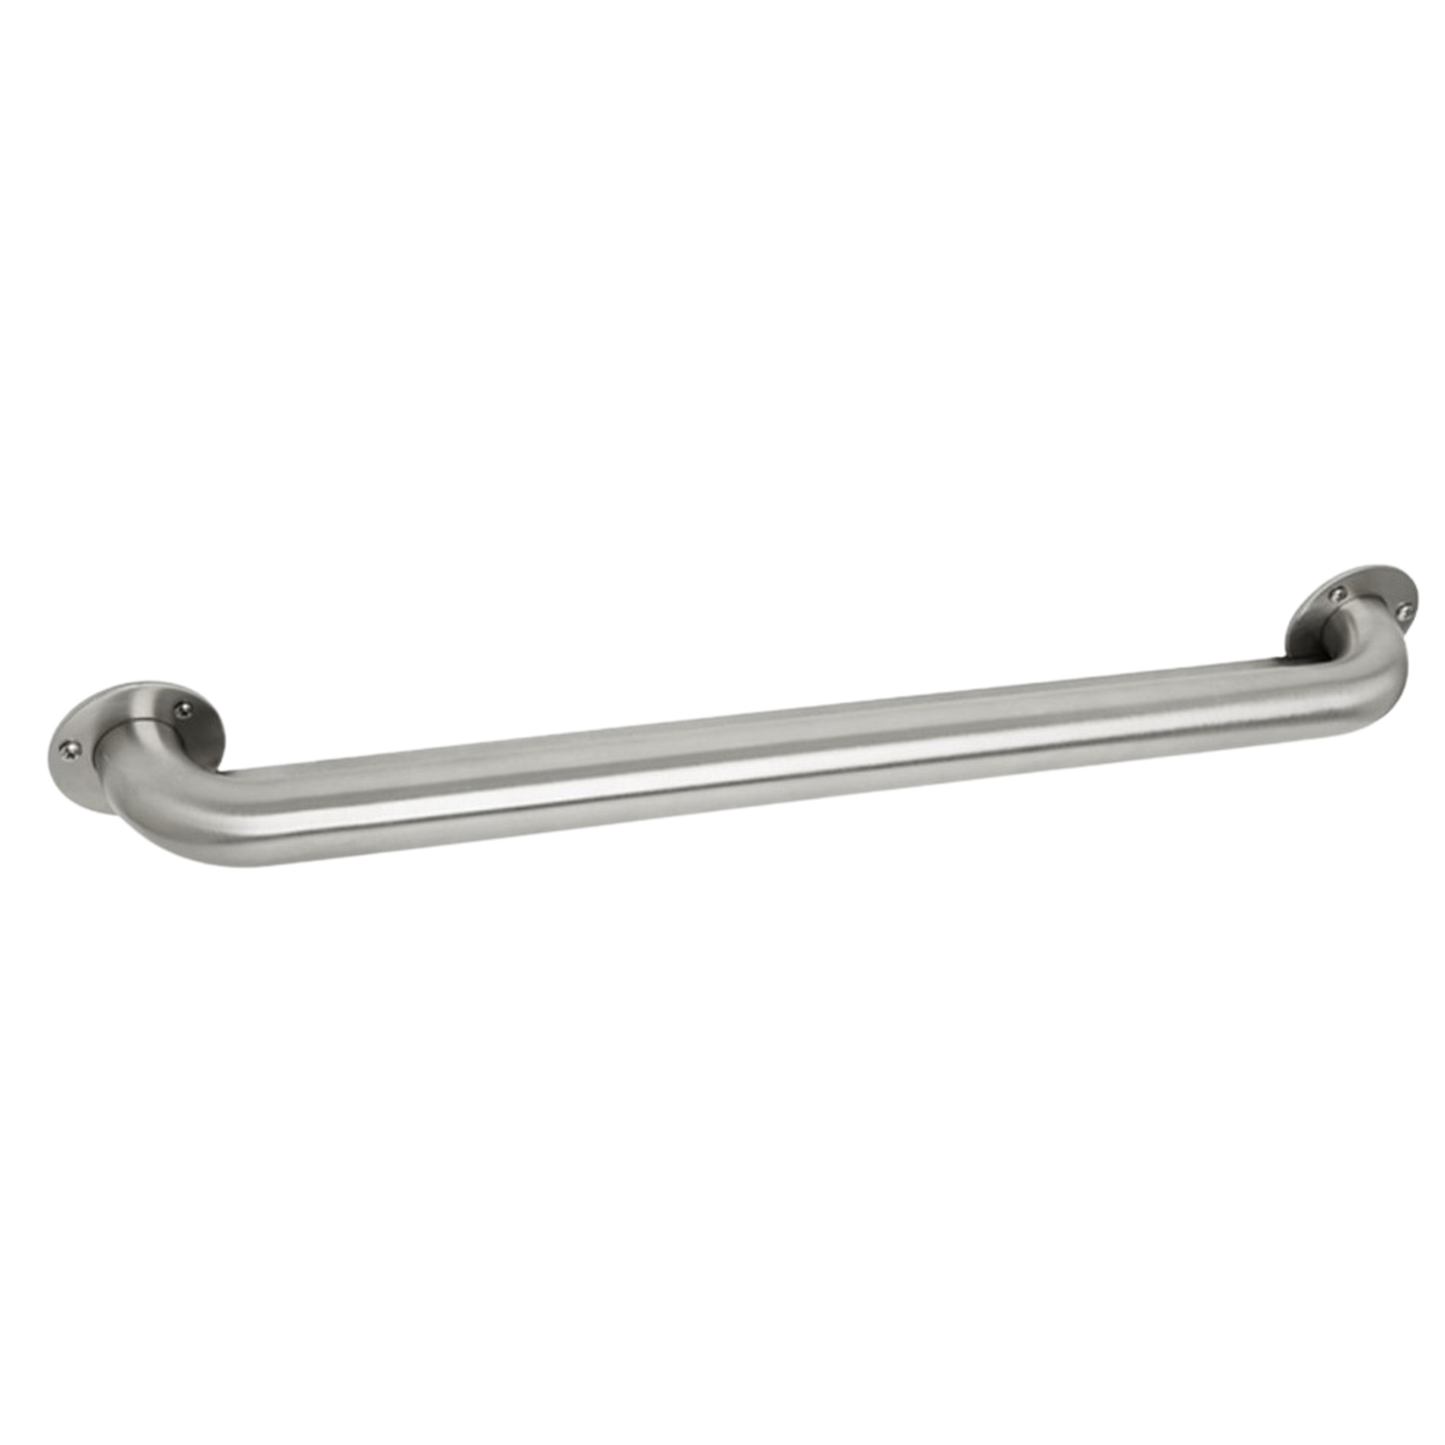 Seachrome Signature Series 24" Satin Stainless Steel 1.5 Diameter Exposed 3-Hole Mounting Flange Switch Weld Standard Ligature Resistant Grab Bar